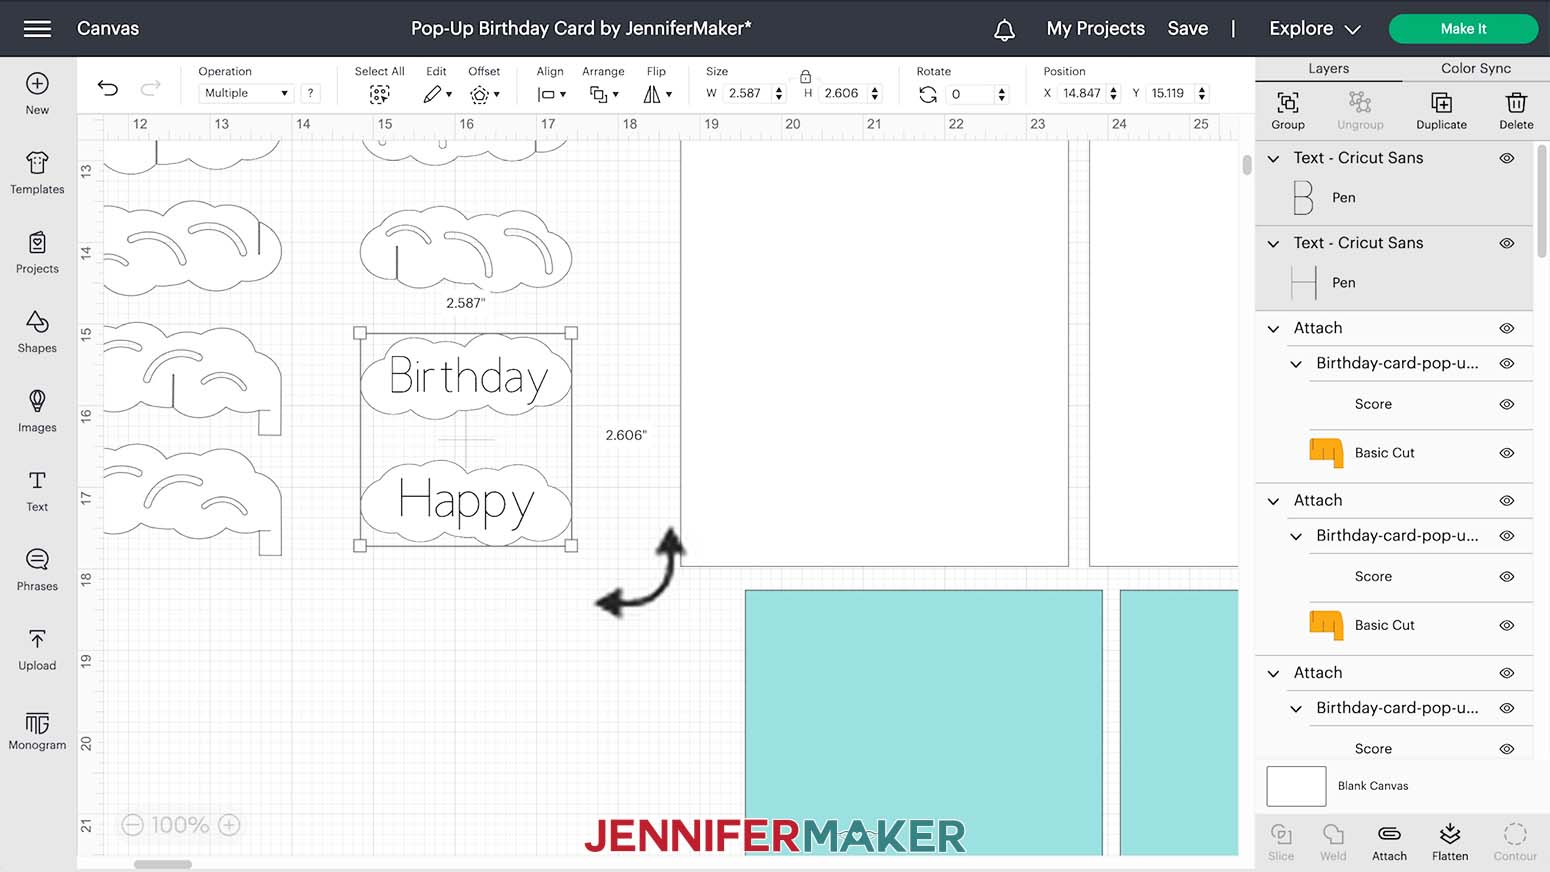 Image showing to attach the text to the clouds for the birthday card pop up.